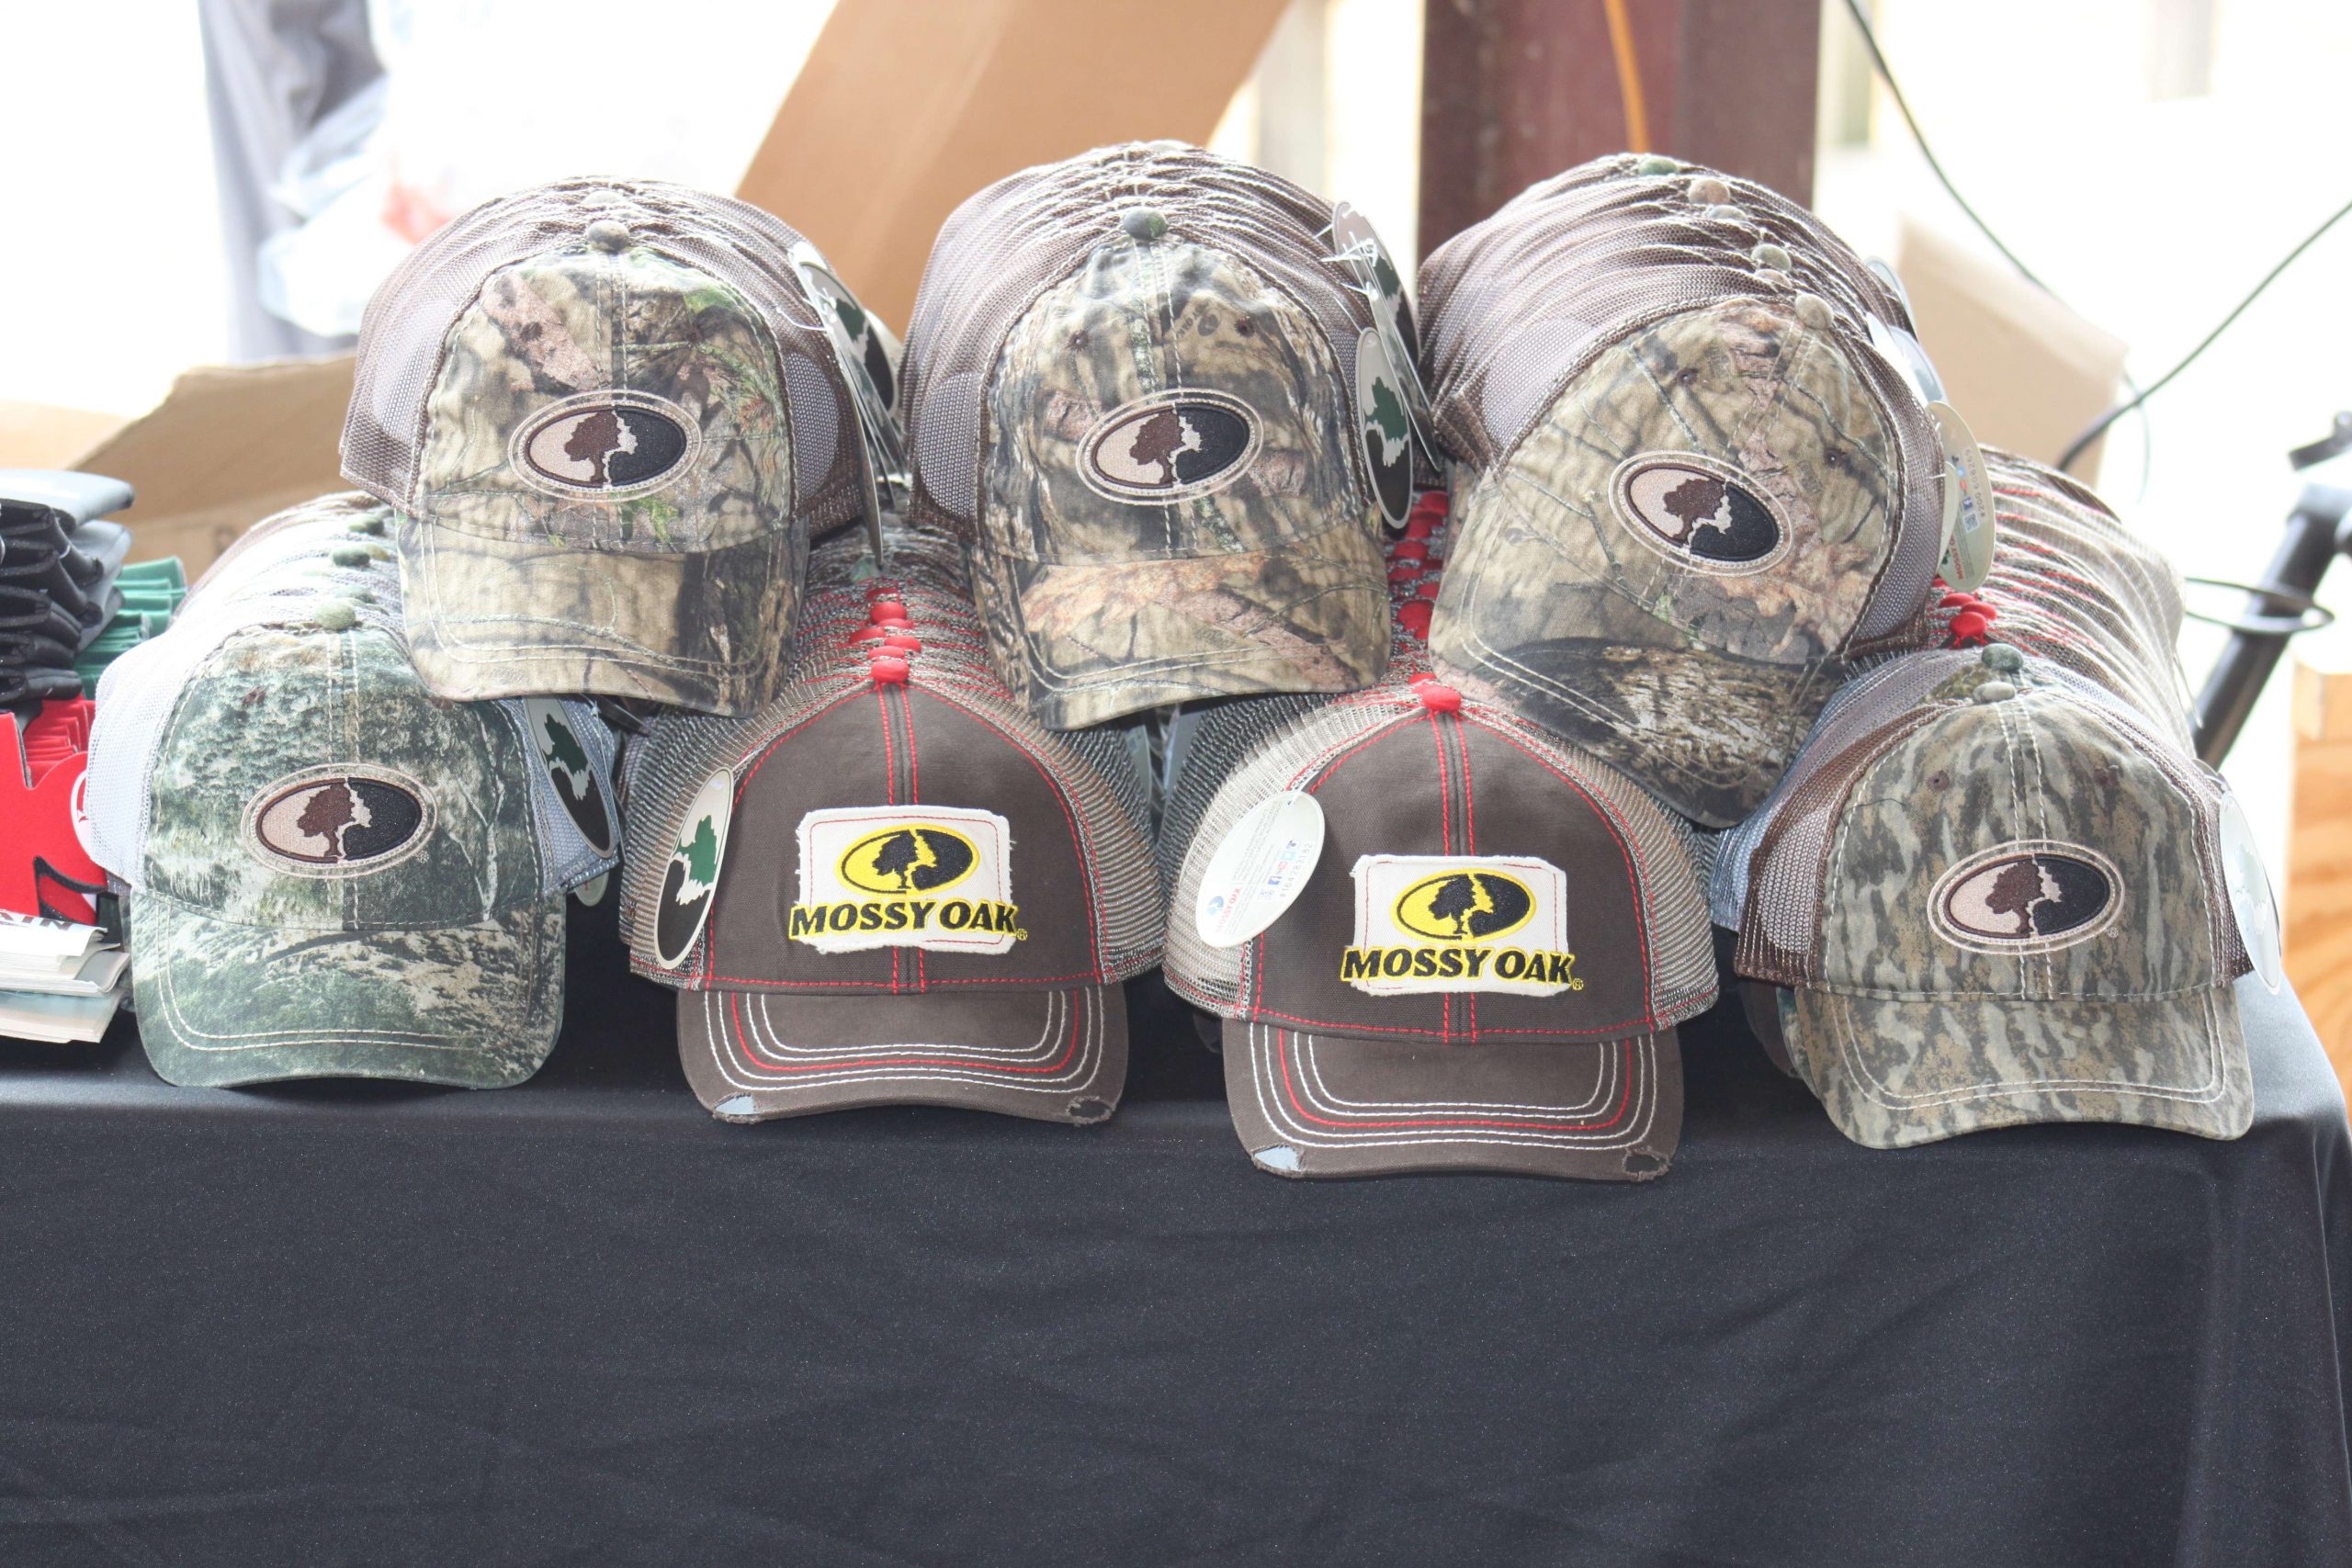 And these nifty lids from new Bassmaster High School sponsor Mossy Oak.